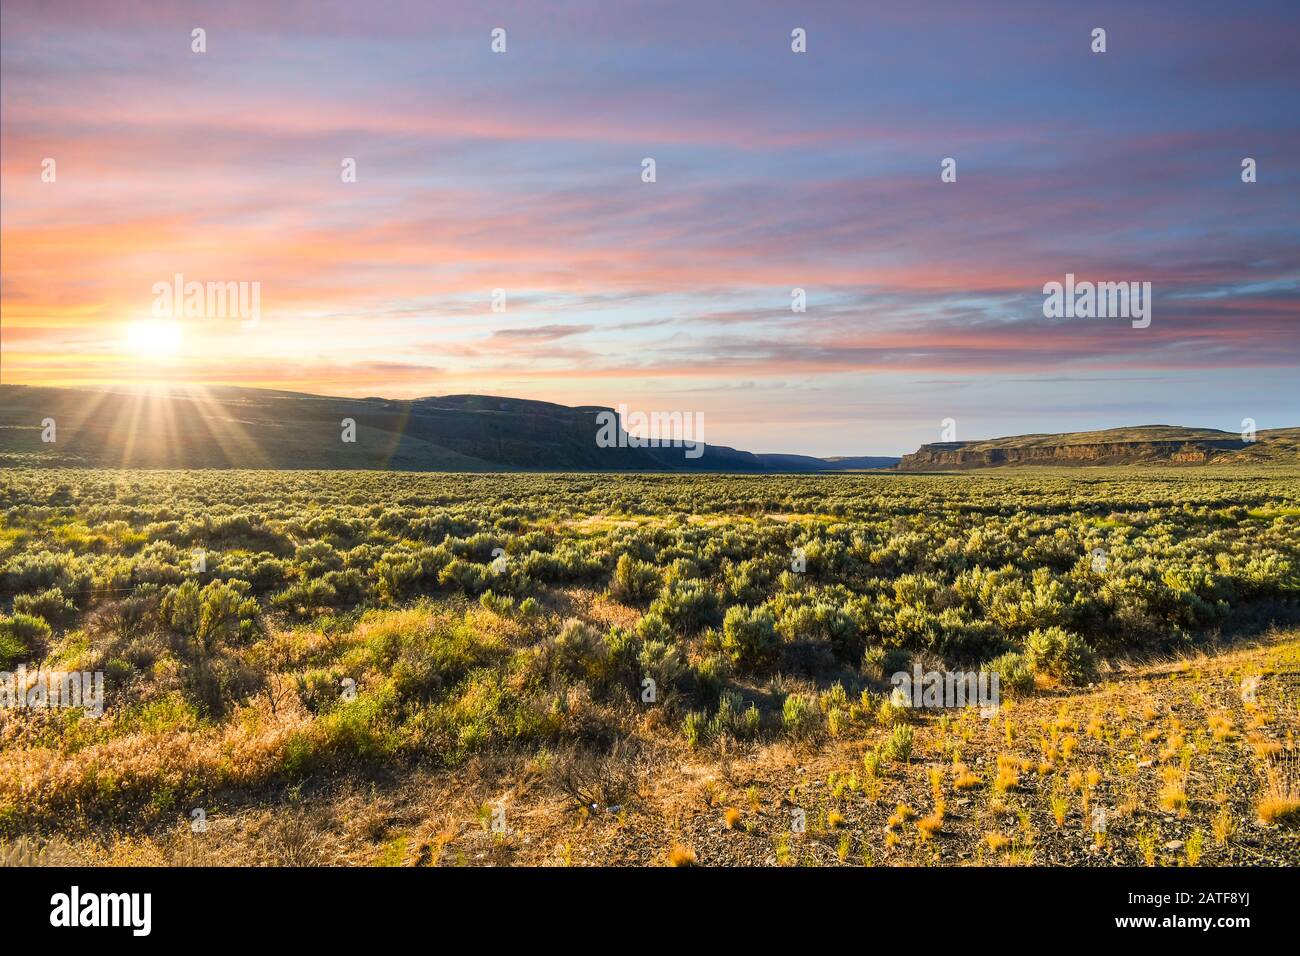 Sunset in the high desert and mountains of the Pacific Northwest near Wenatchee, Washington, in the United States. Stock Photo